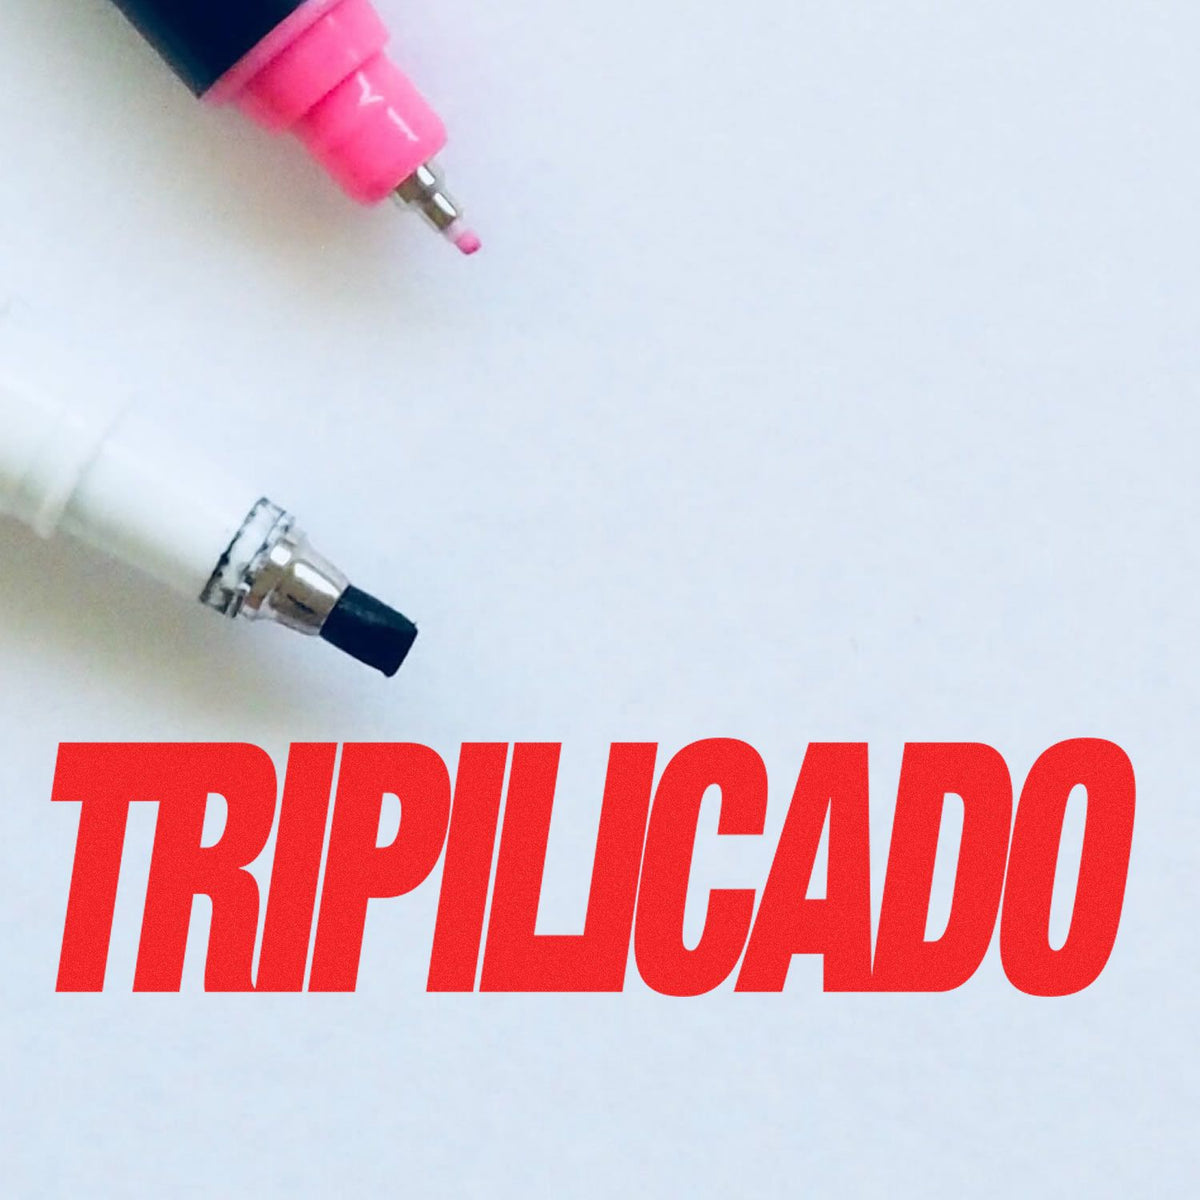 Large Tripilicado Rubber Stamp In Use Photo